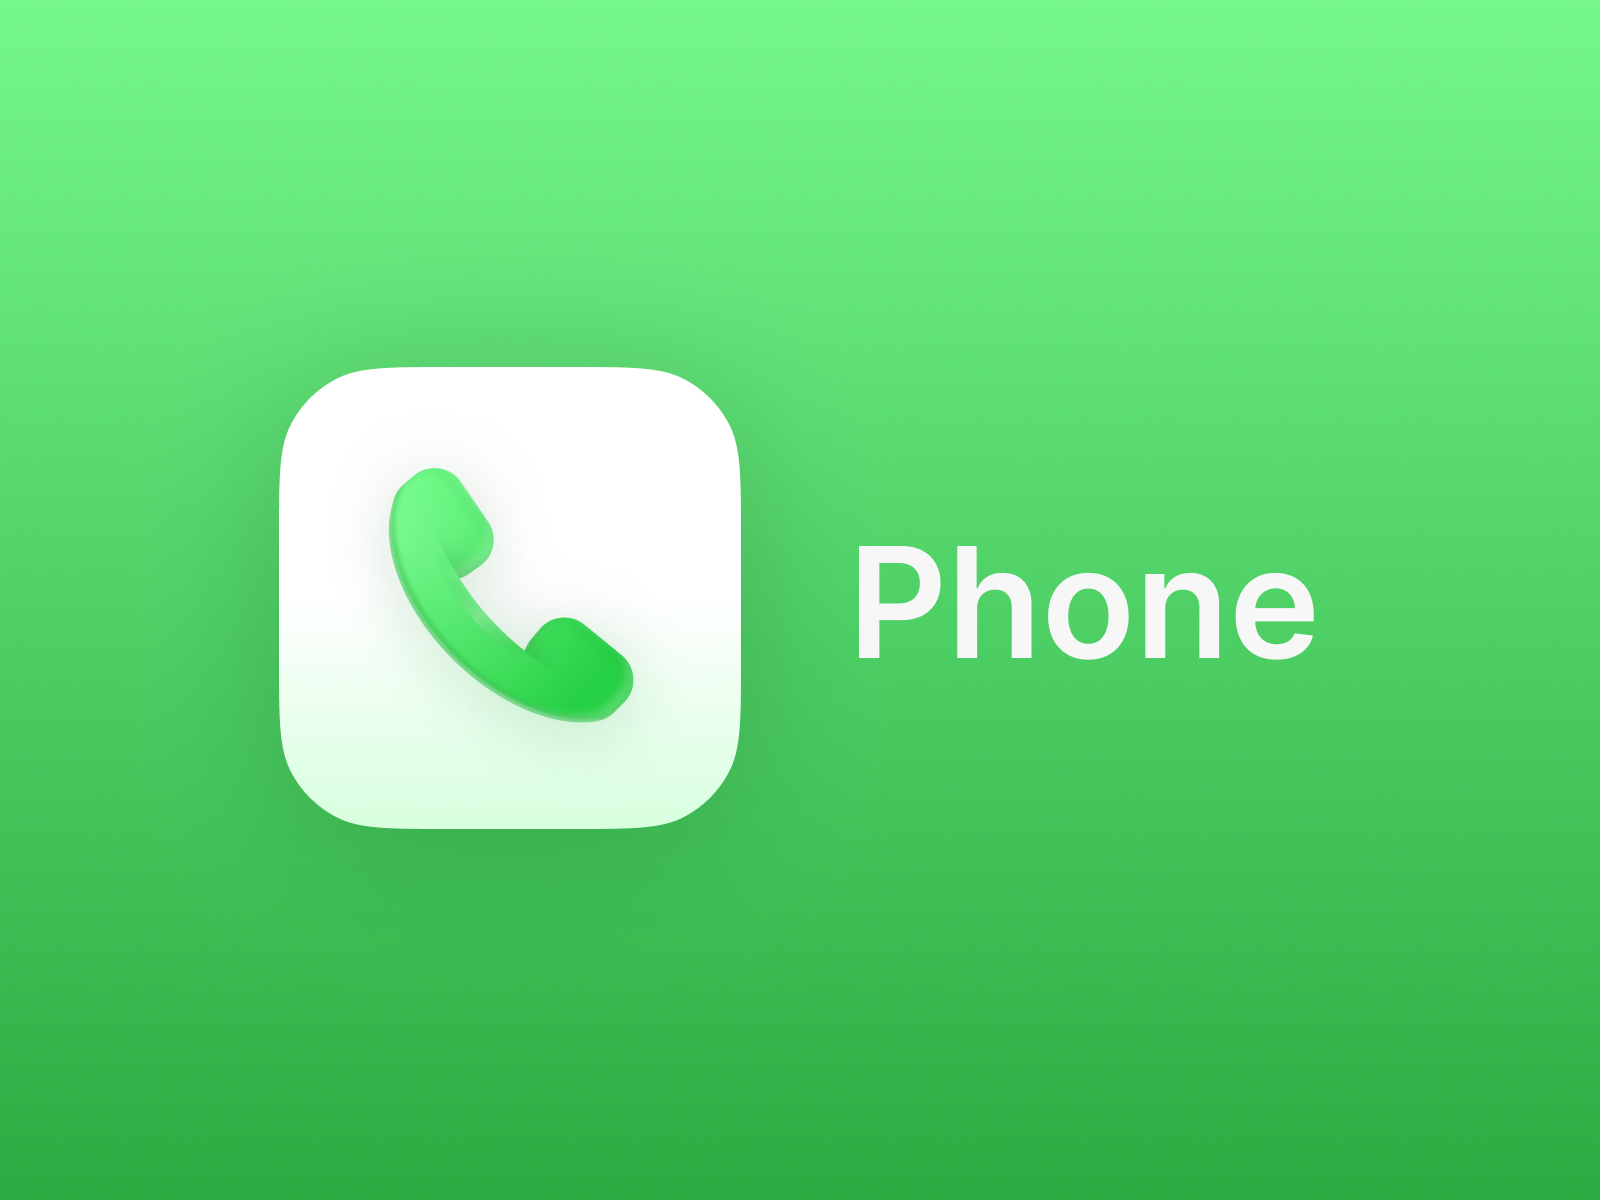 Phone - App icon redesign concept #30 by Eddy on Dribbble